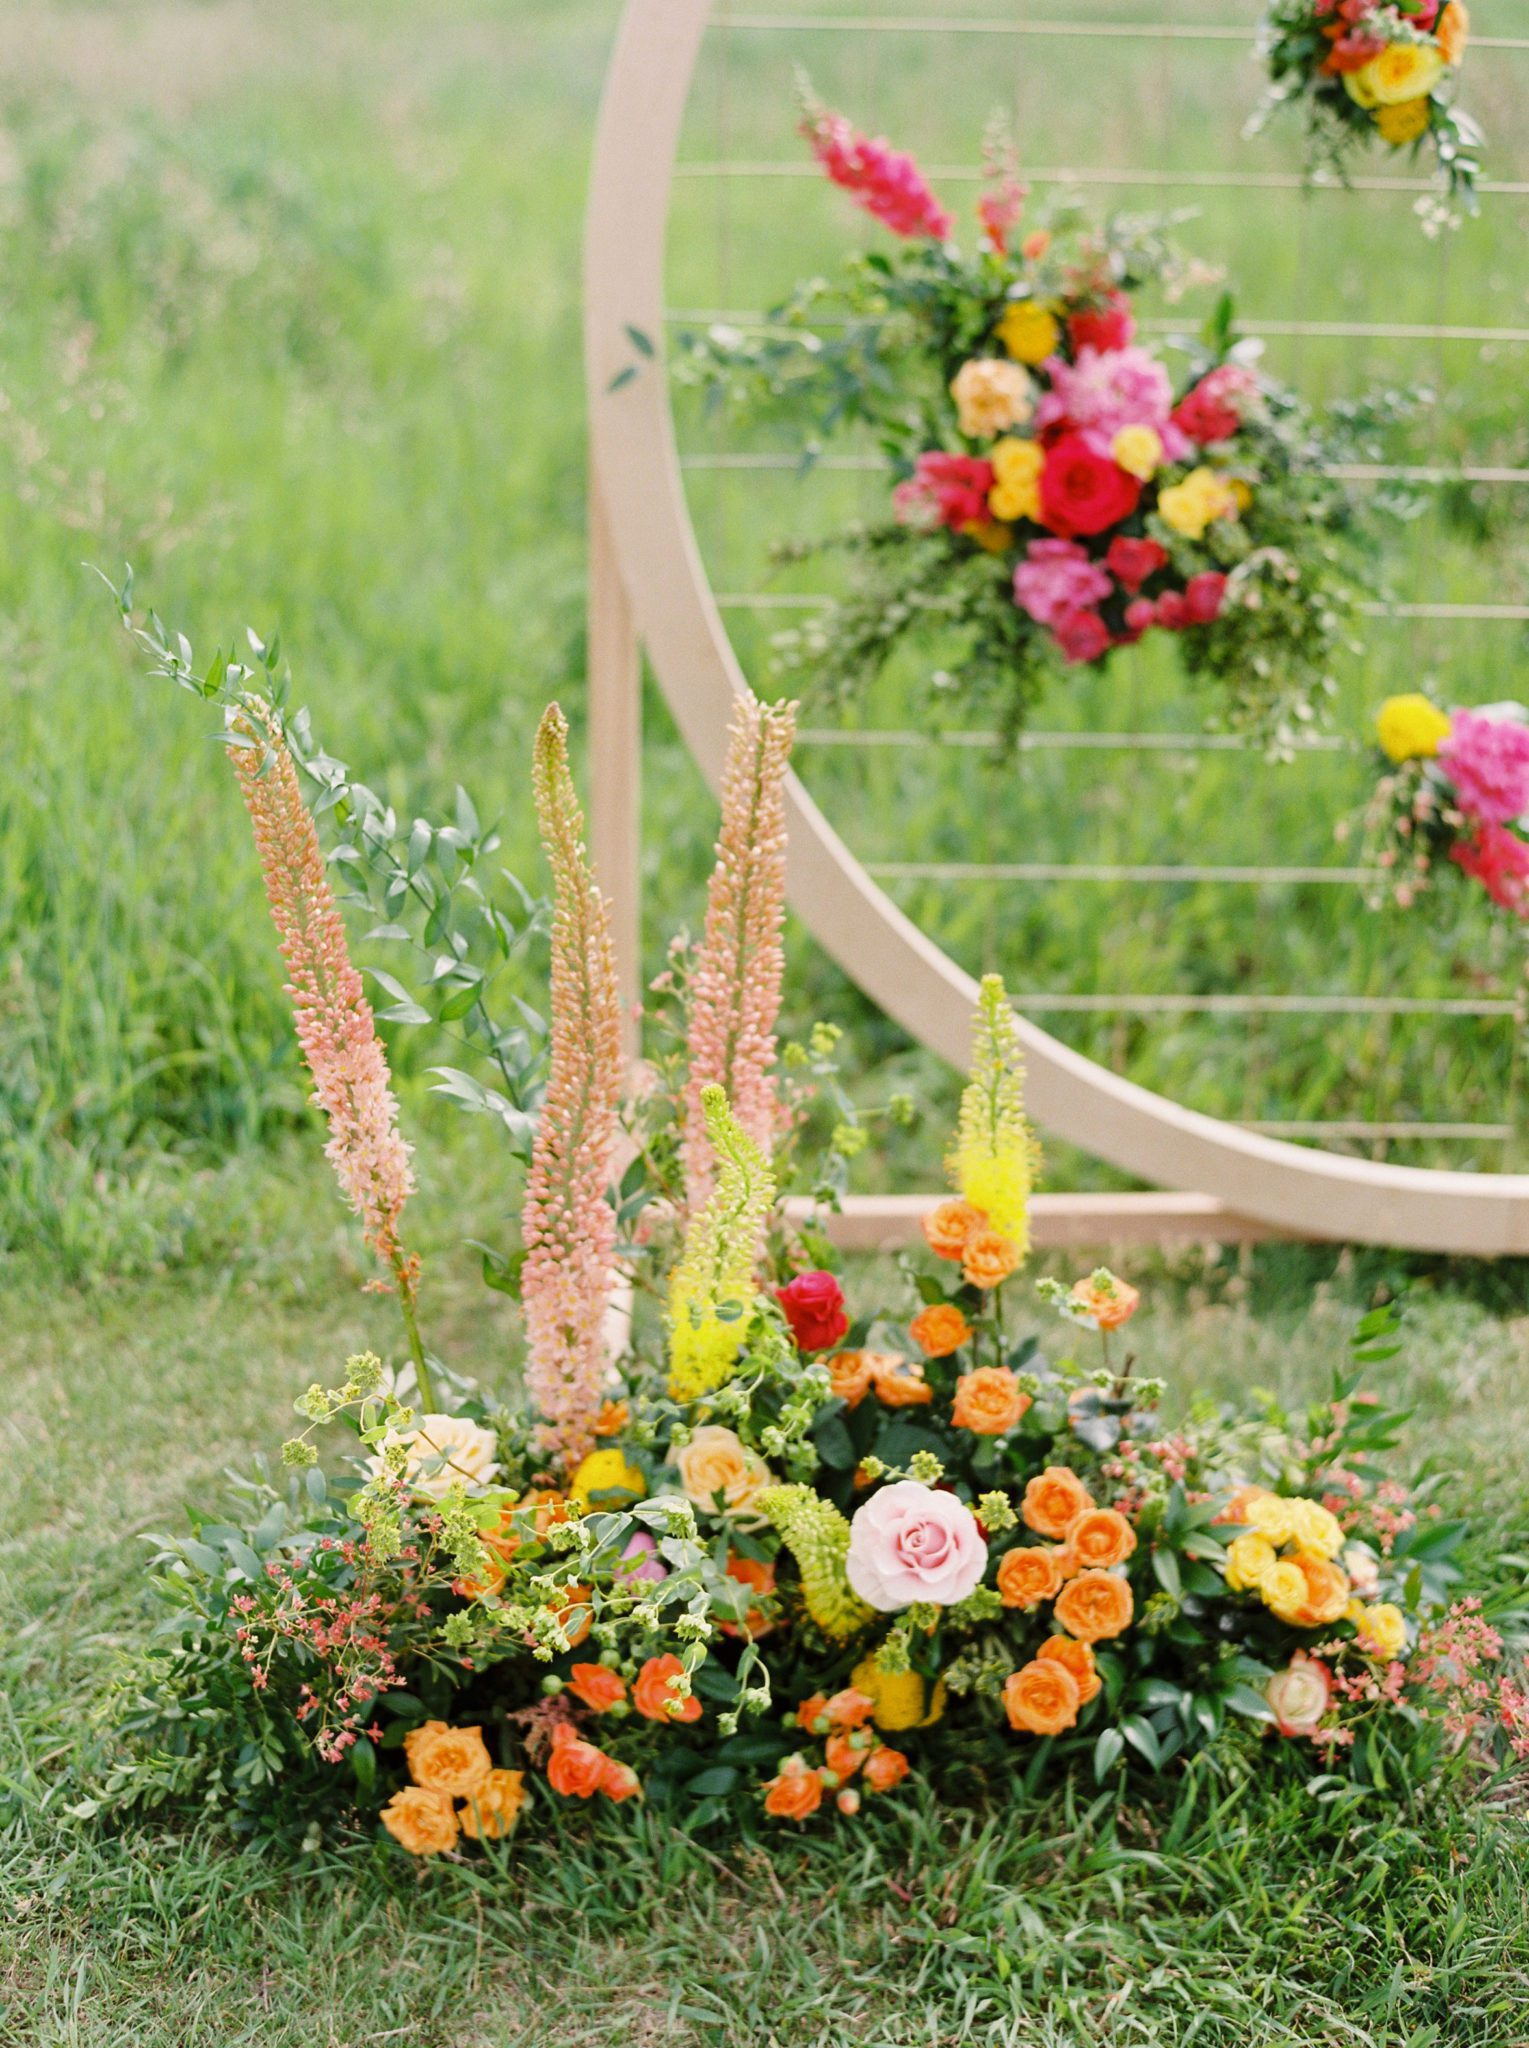 Farmhouse Chic: A Vibrant Wedding Inspiration Shoot at the Gathered | Brontë Bride Blog - Modern Wedding Arch with Bright Colourful Flowers